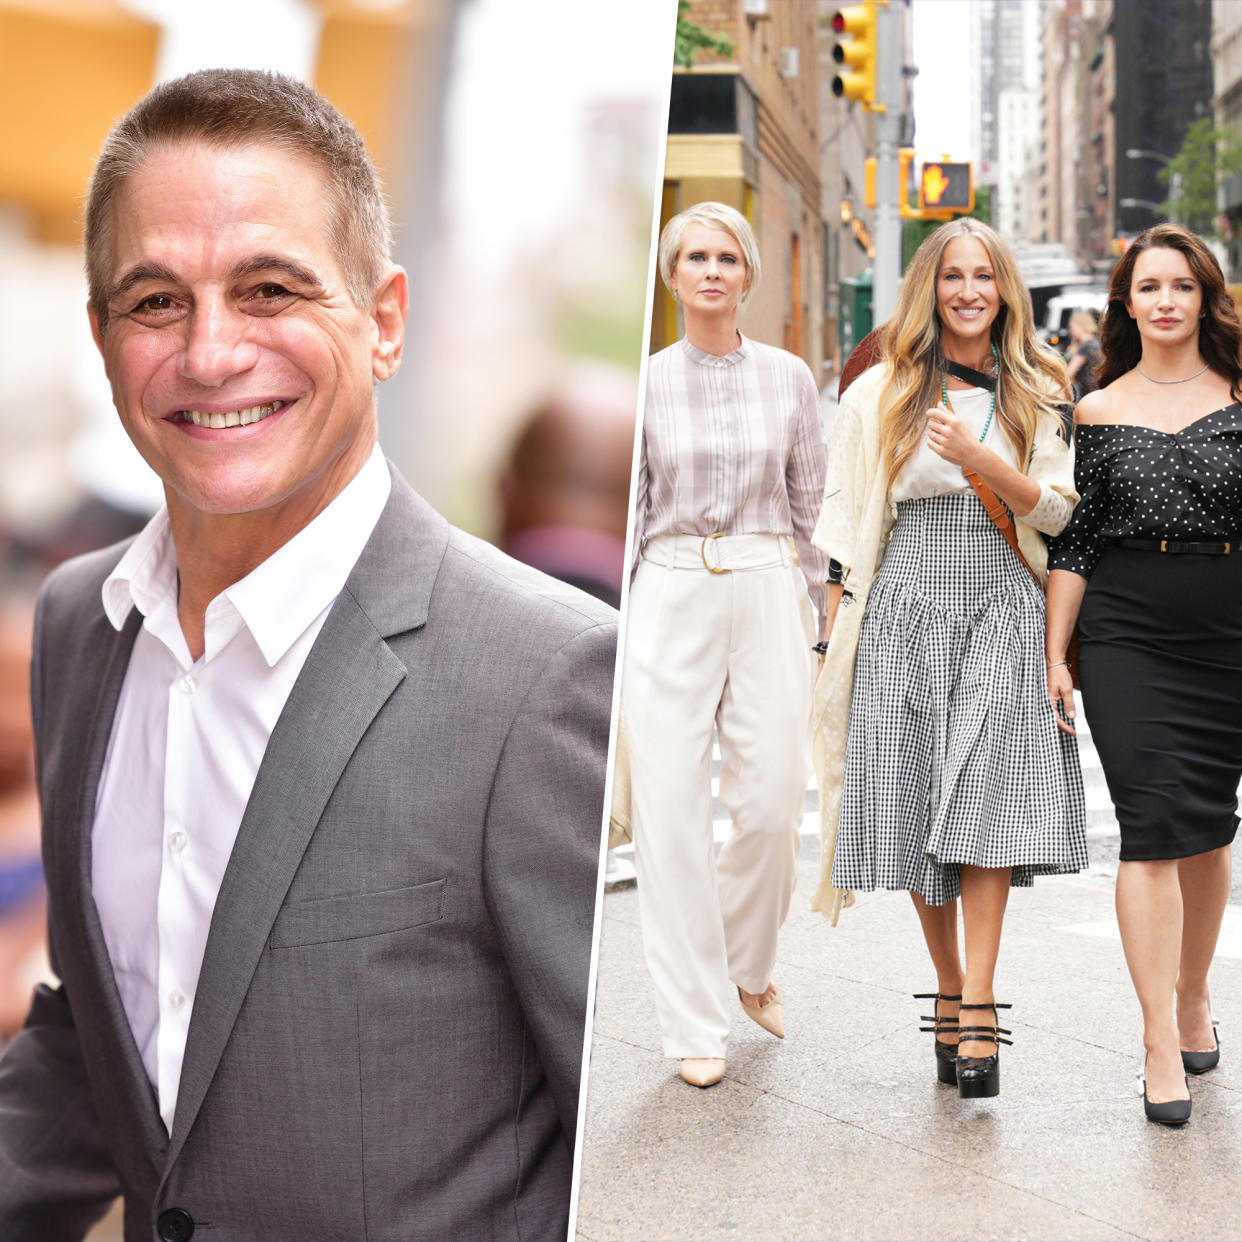 Tony Danza will be joining the cast of 